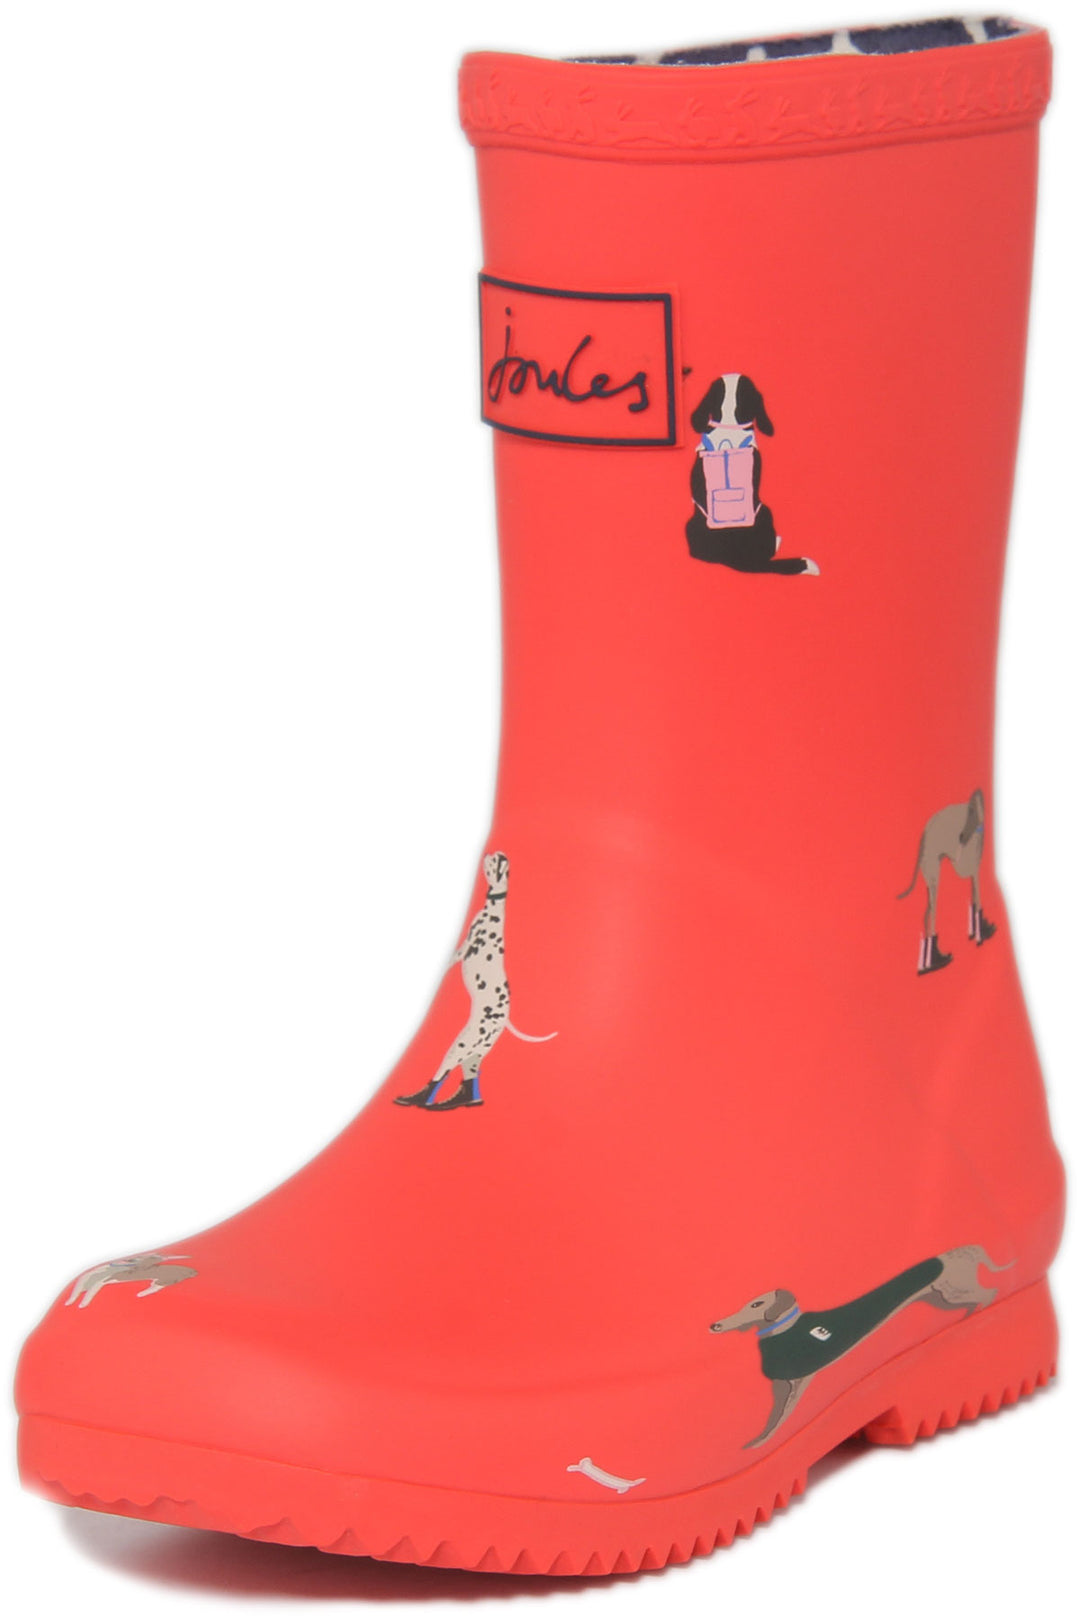 Joules Junior Roll Up In Red